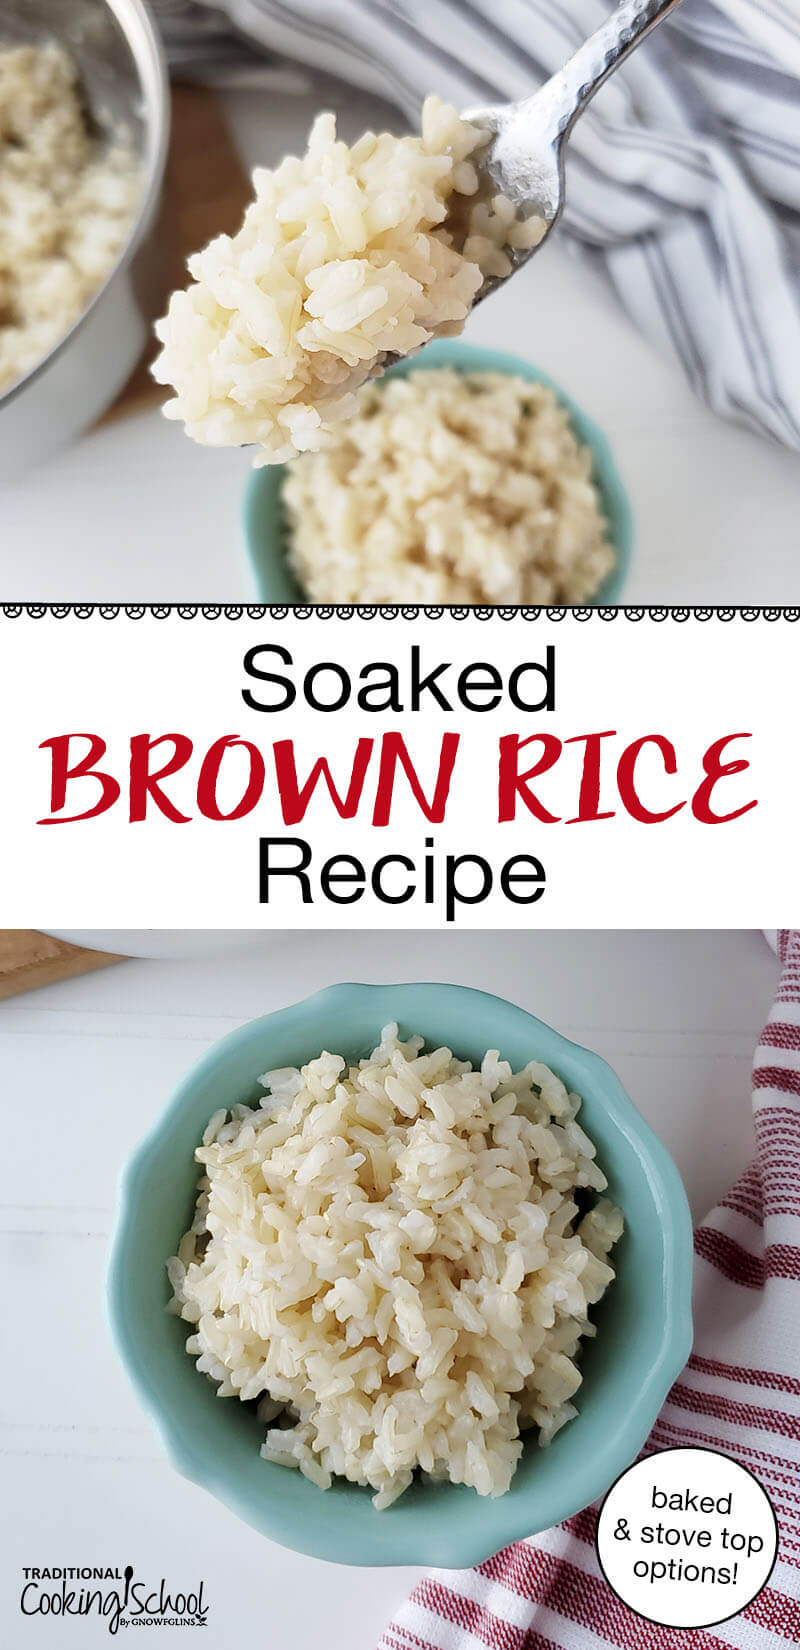 photo collage of cooked brown rice in a blue ceramic bowl, and on a spoon held up for the camera, with text overlay: "Soaked Brown Rice Recipe (baked and stove-top options!)"